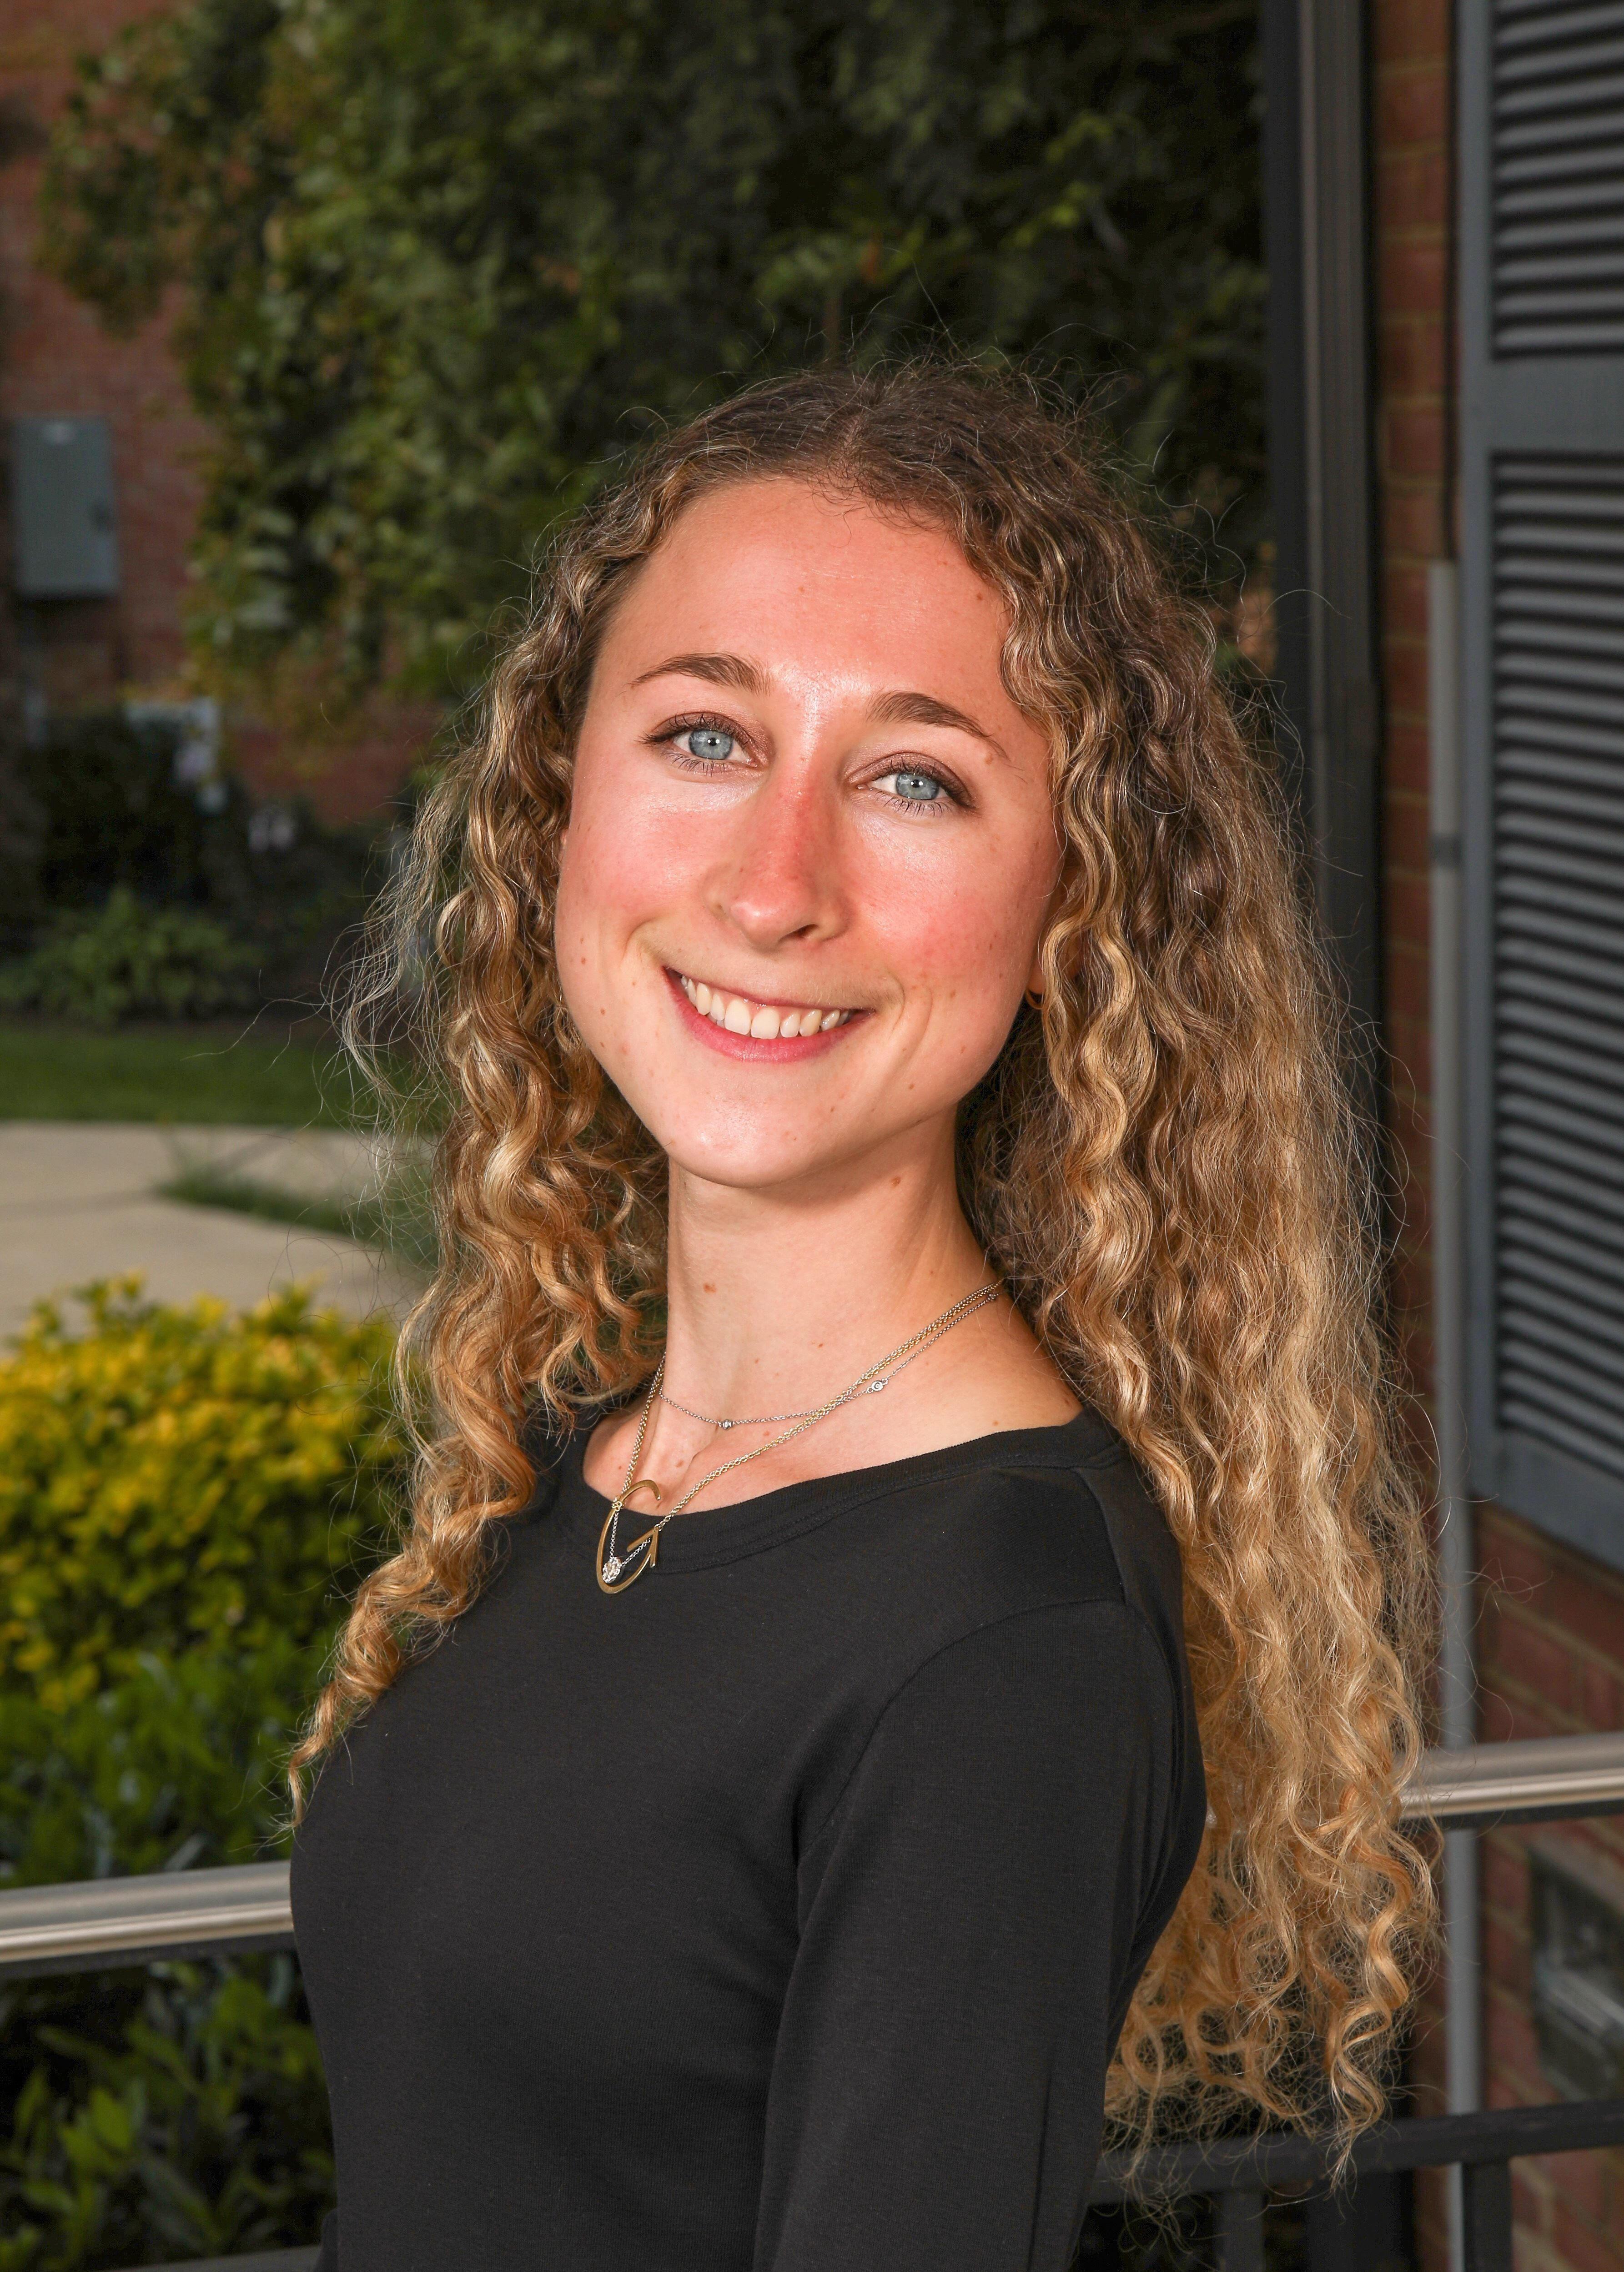 Gabrielle Frohlich, student of the School of Public Health at the University of Maryland